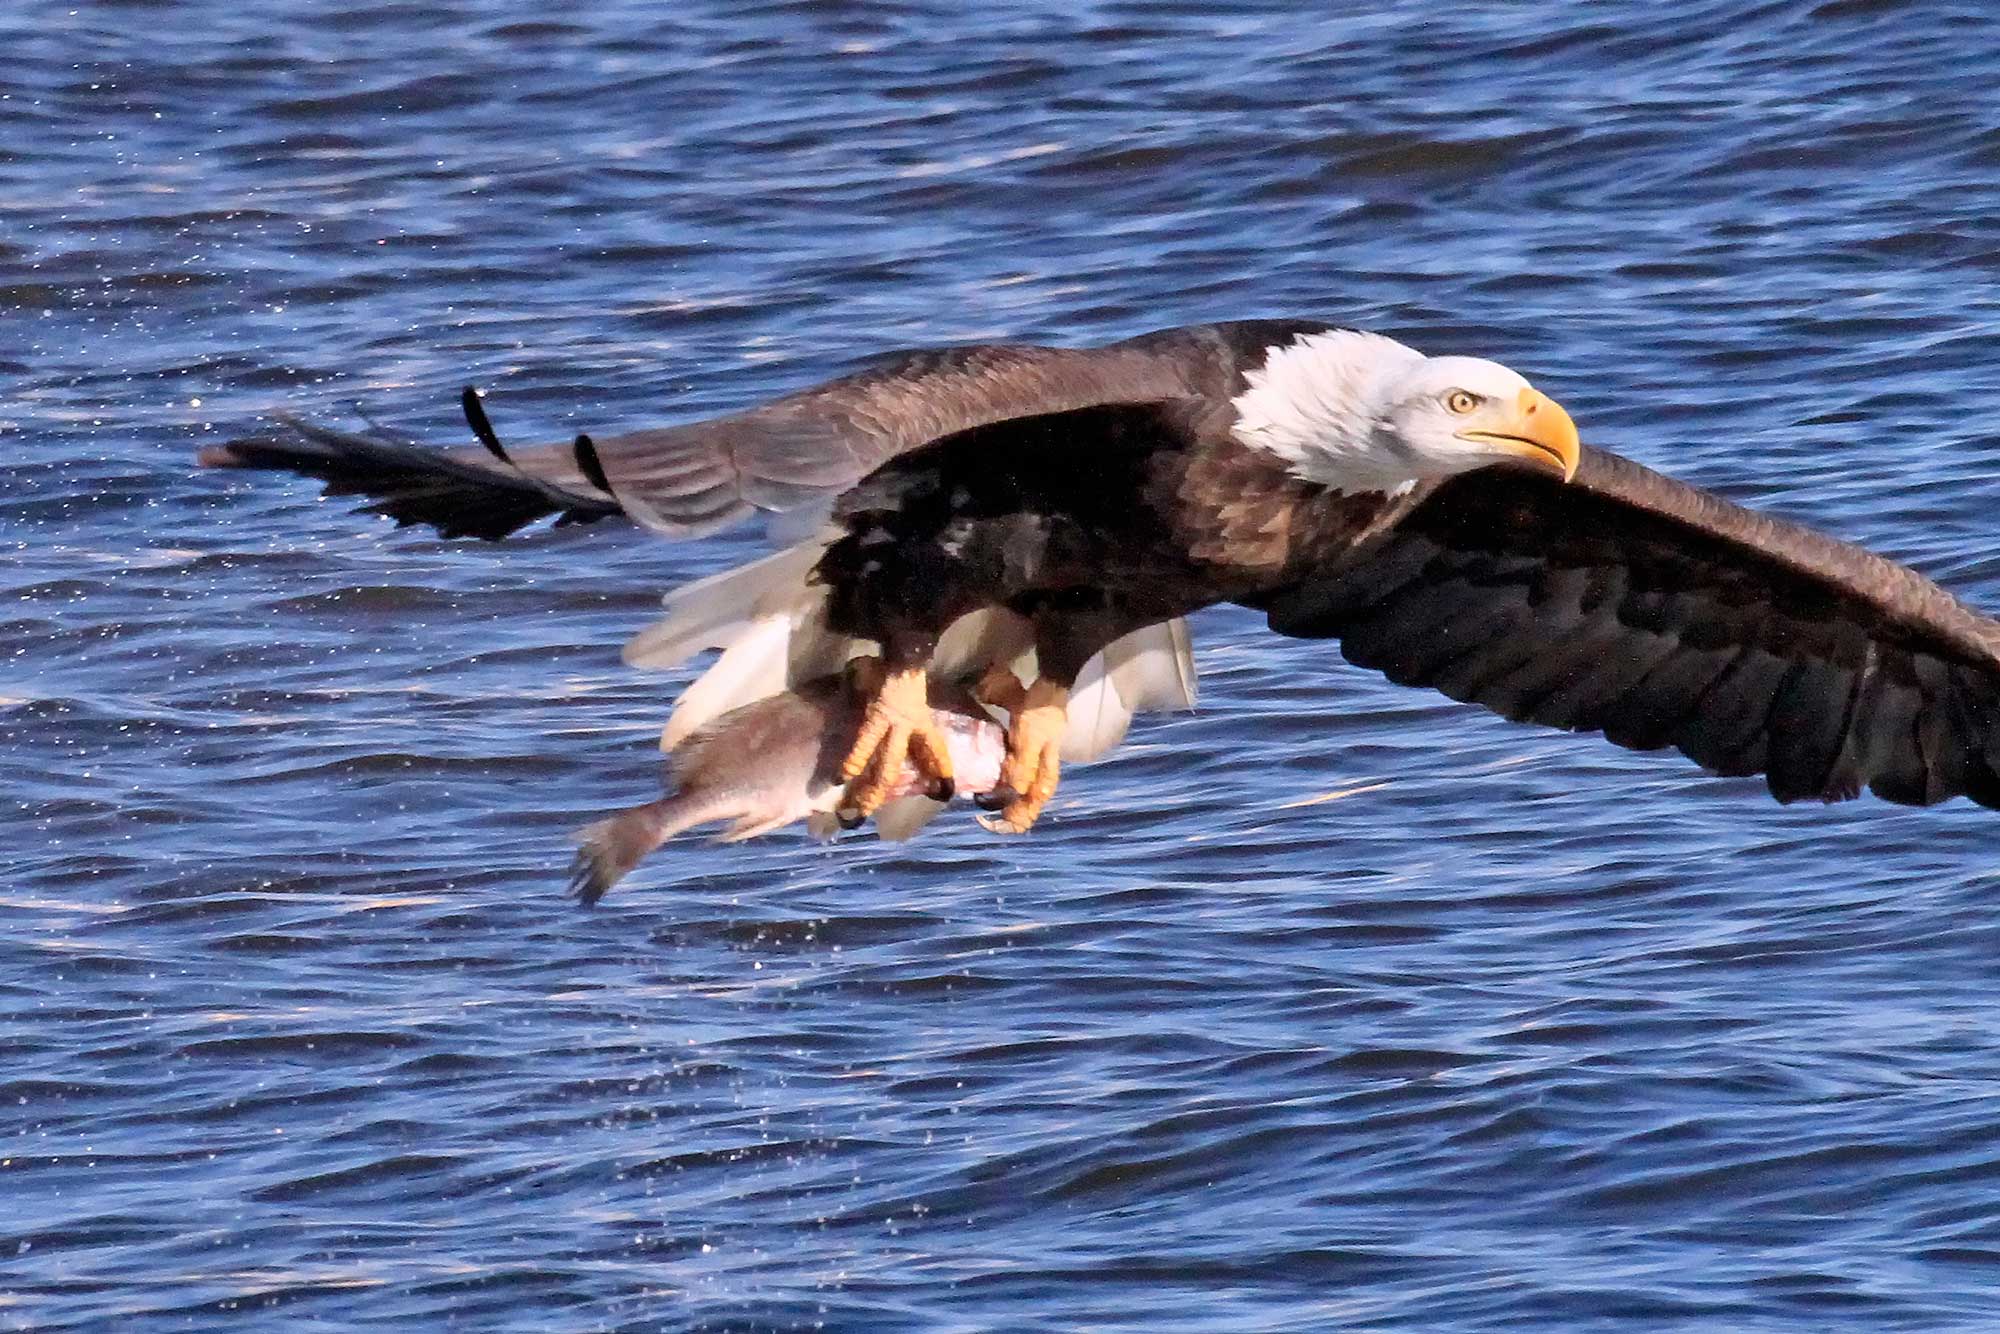 A bald eagle with a fish in its talons.